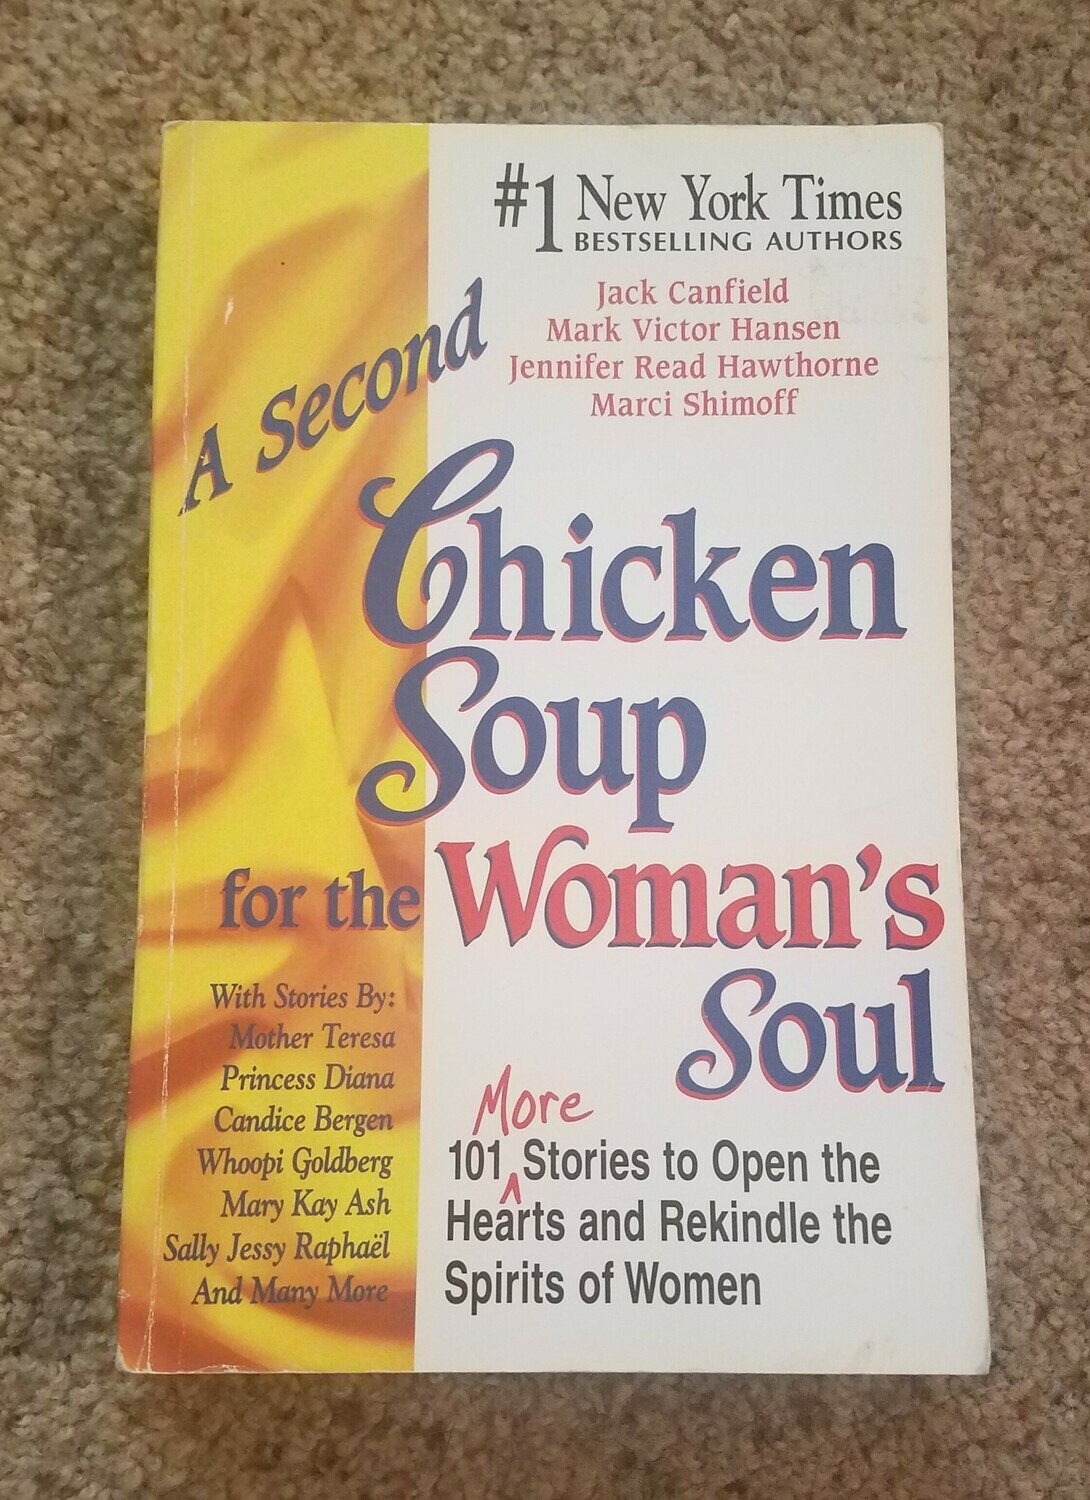 A Second Chicken Soup for the Woman's Soul by Jack Canfield, Mark Victor Hansen, Jennifer Read Hawthorne, and Marci Shimoff